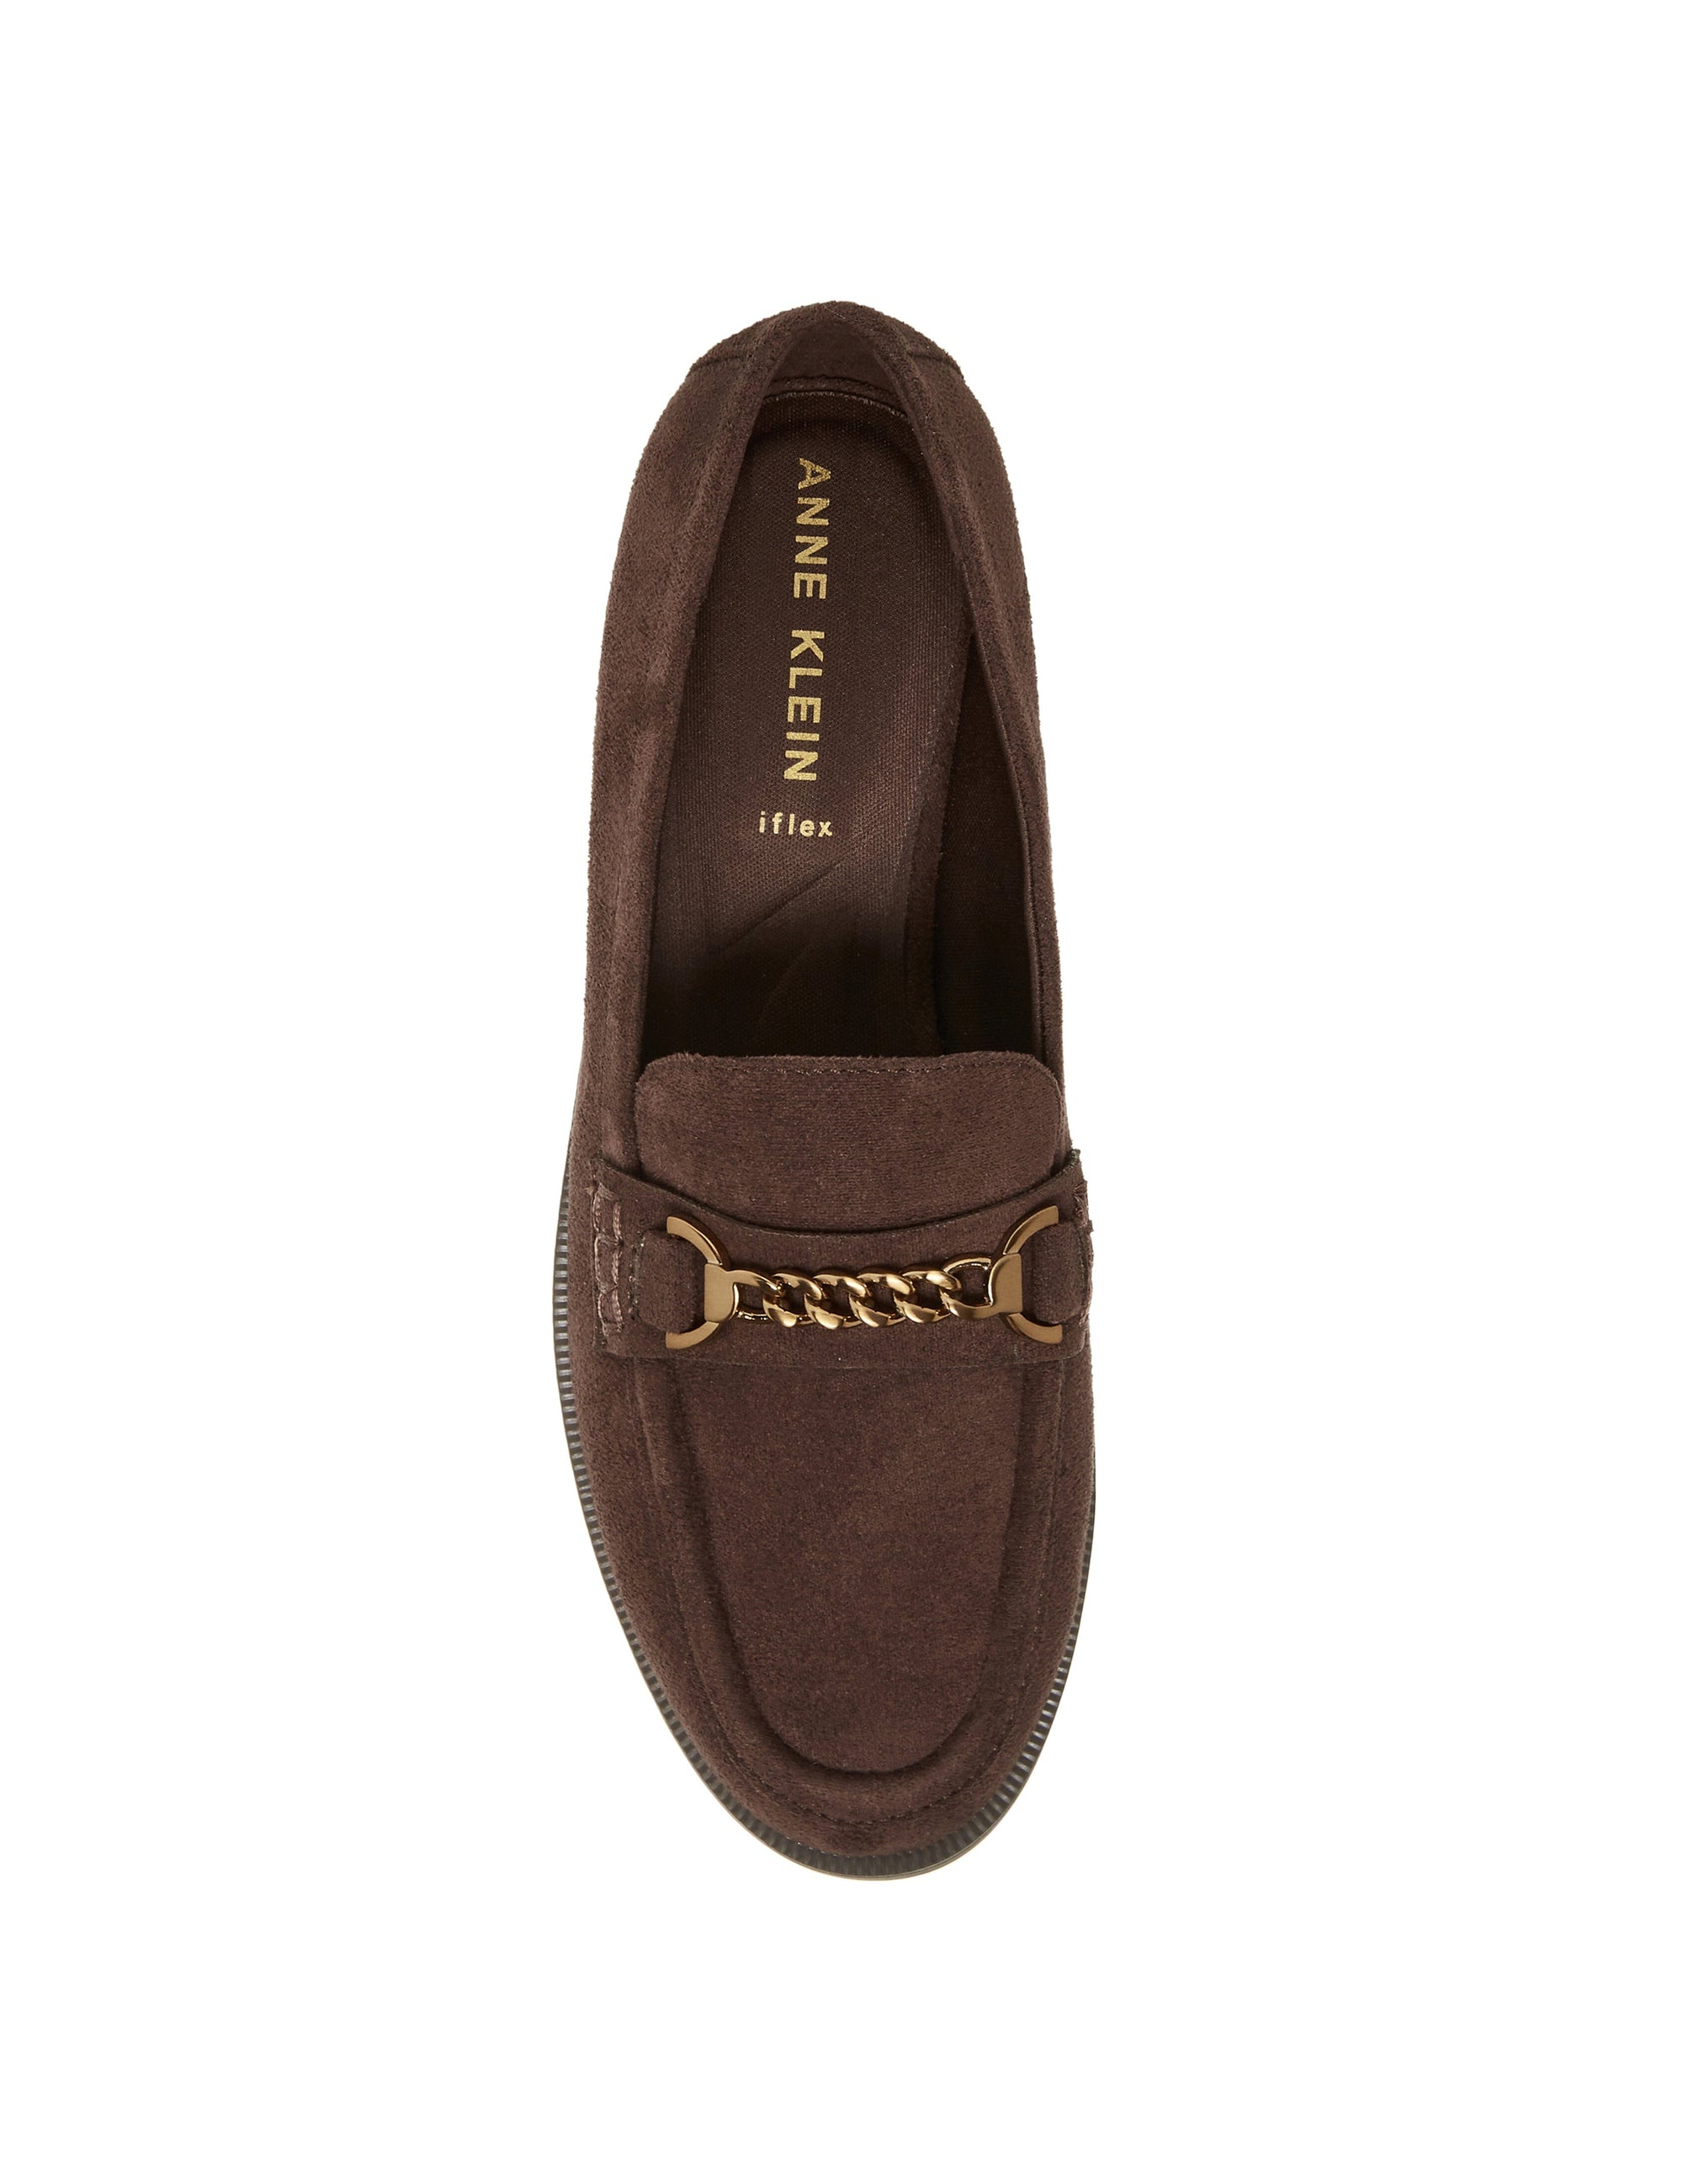 Anne Klein Chocolate Pastry Loafer